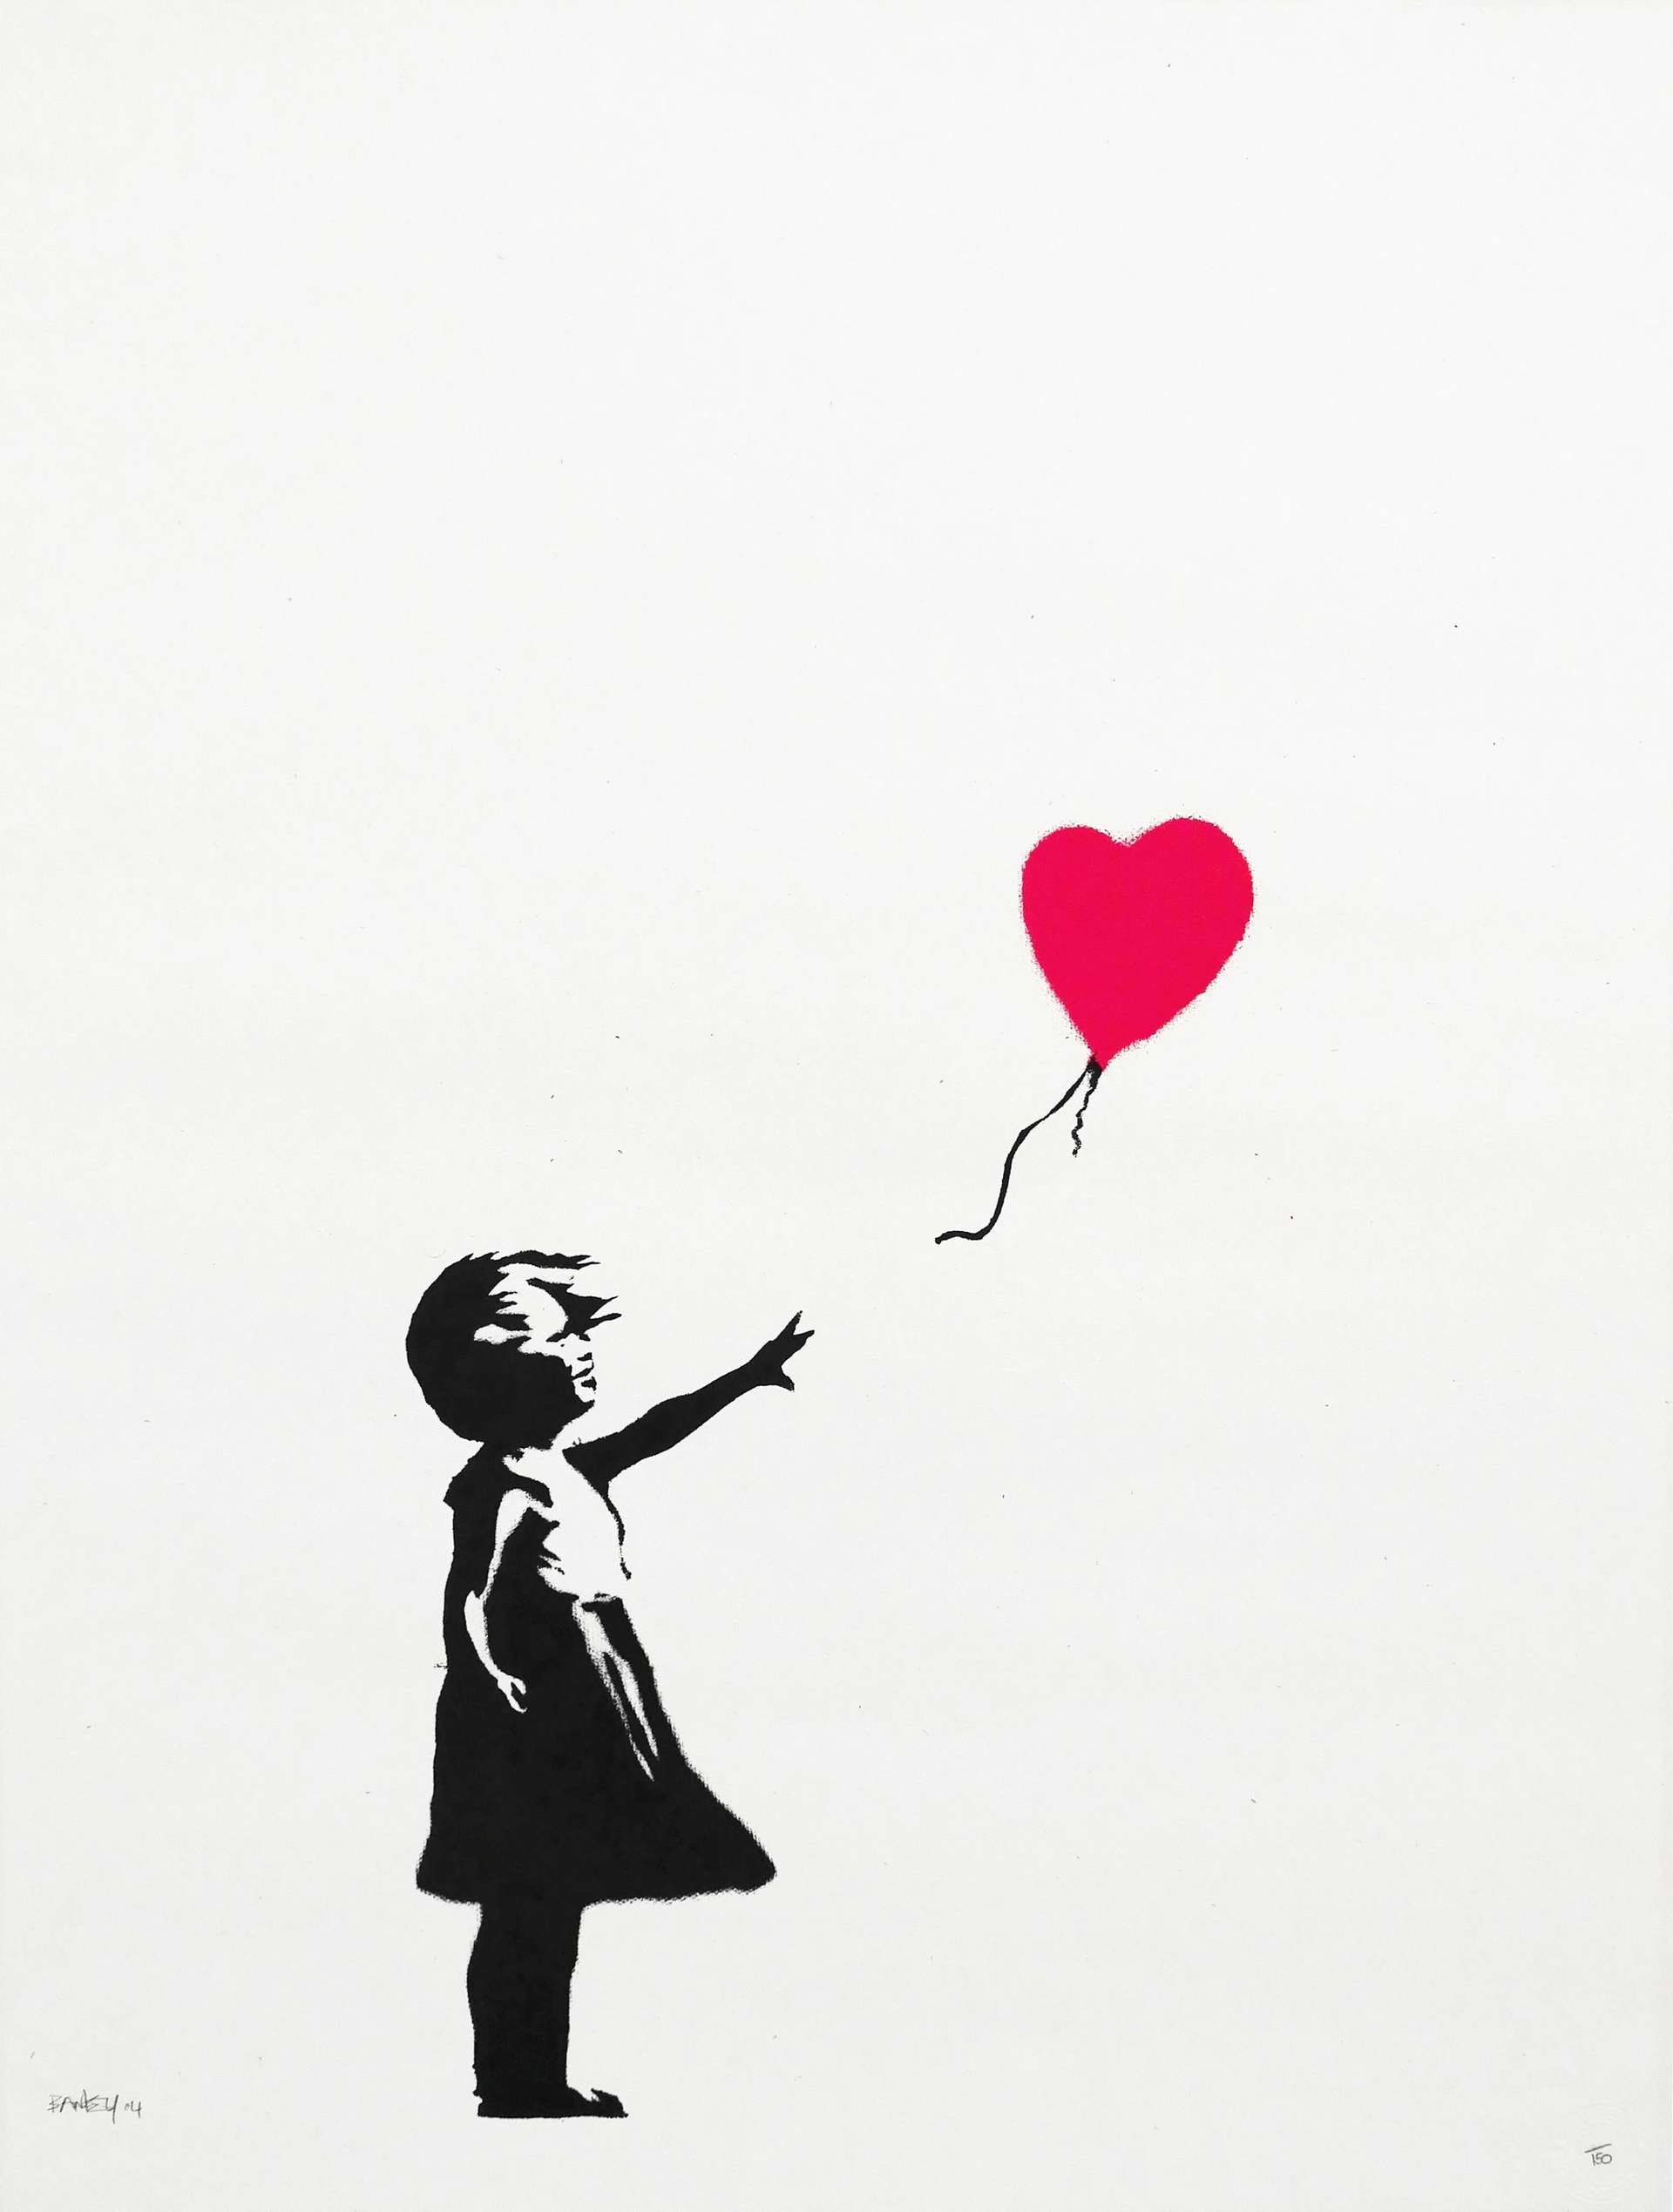 A young girl in a dress letting go of a balloon, graffitied on a plain background